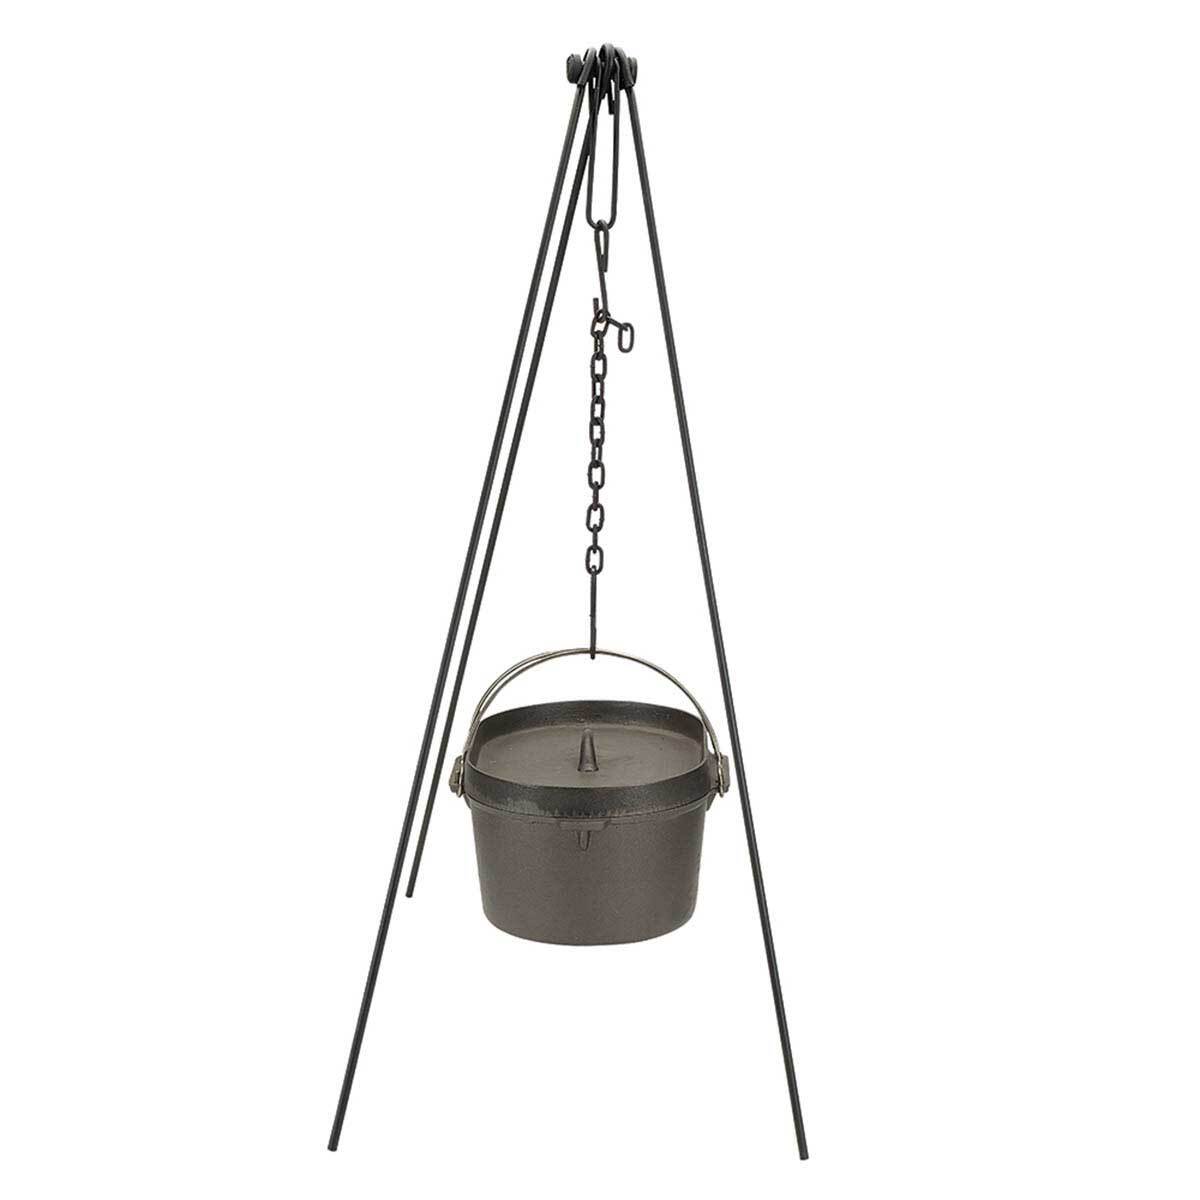 Camp Chef Dutch Oven 50 Tripod, Steel Chain for Hanging Cookware, TRIPOD50